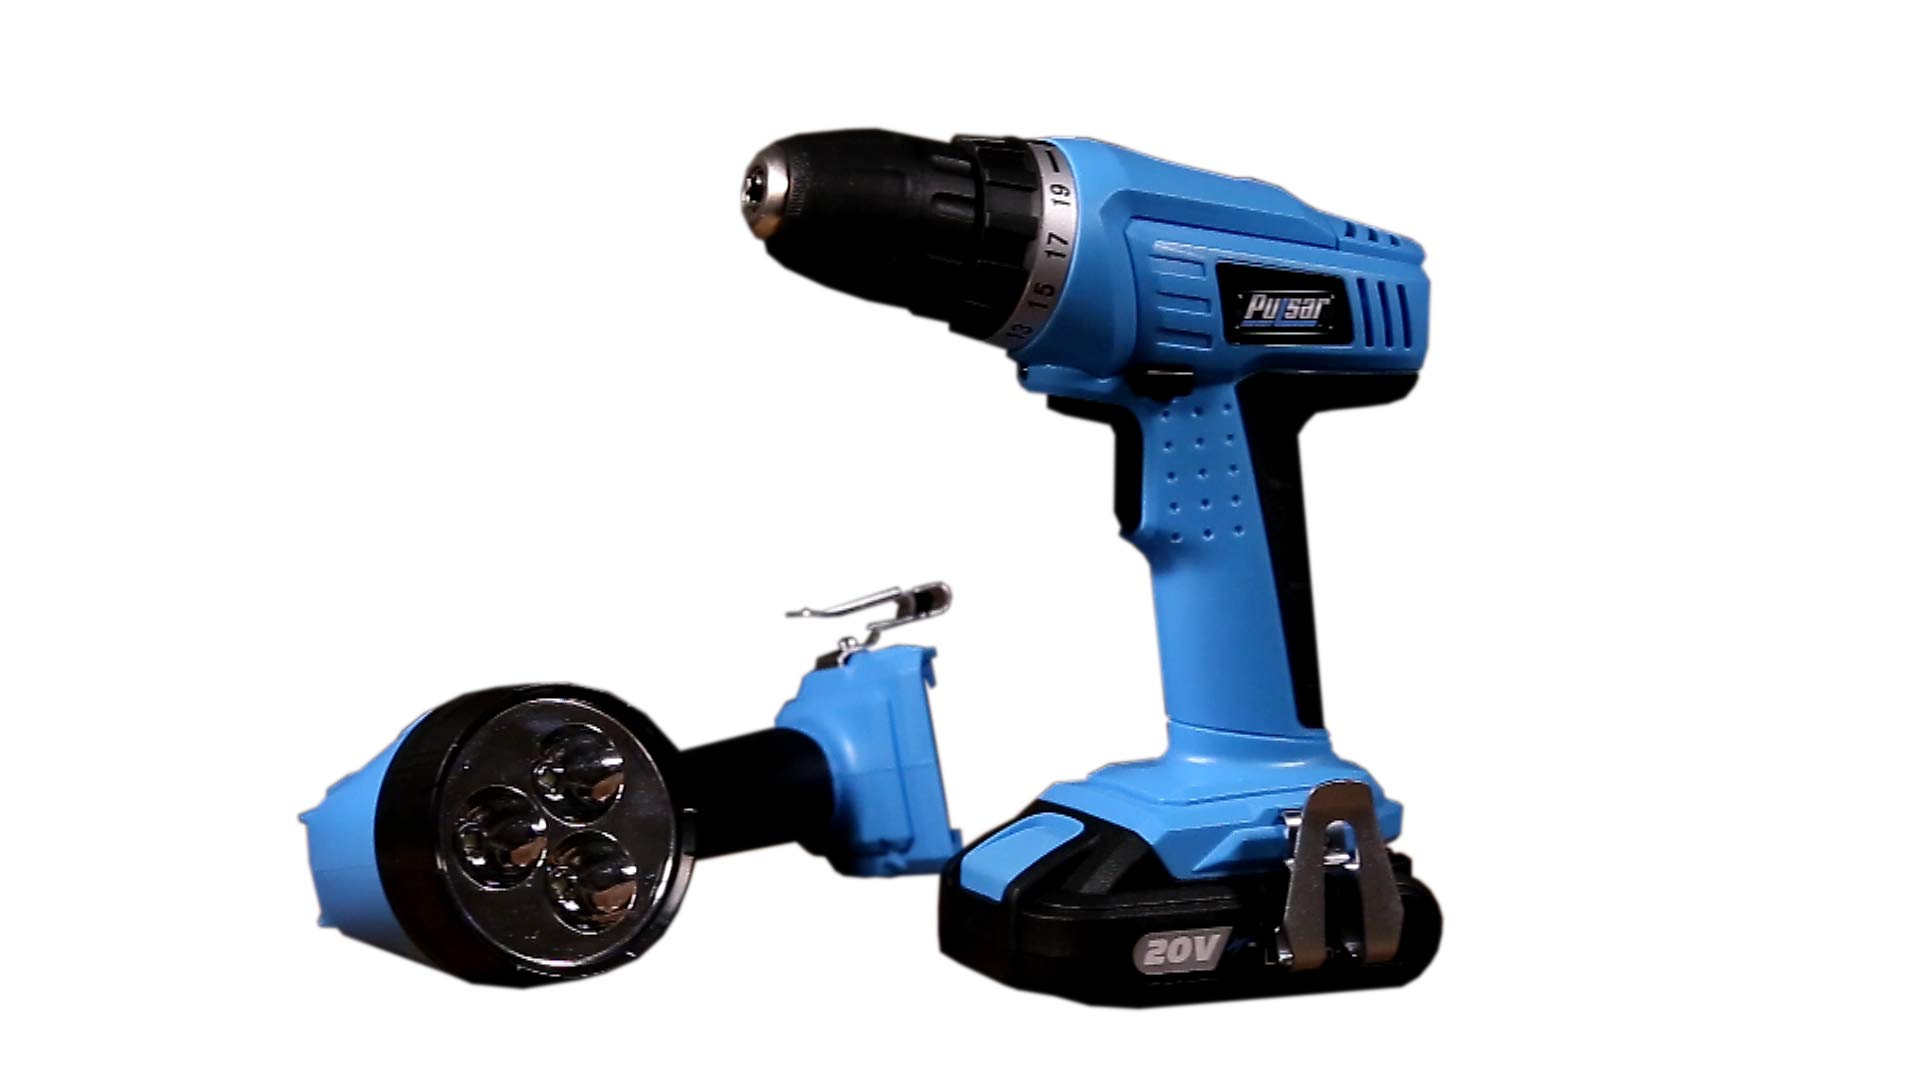 Pulsar 20V Cordless 1.3Ah Lithium-Ion Drill/Driver & Work Light Kit, Featuring A 19+1 Torque Setting Drill, an Adjustable & Freestanding LED Work Light (Kit Includes Battery & Charger), PT25LK